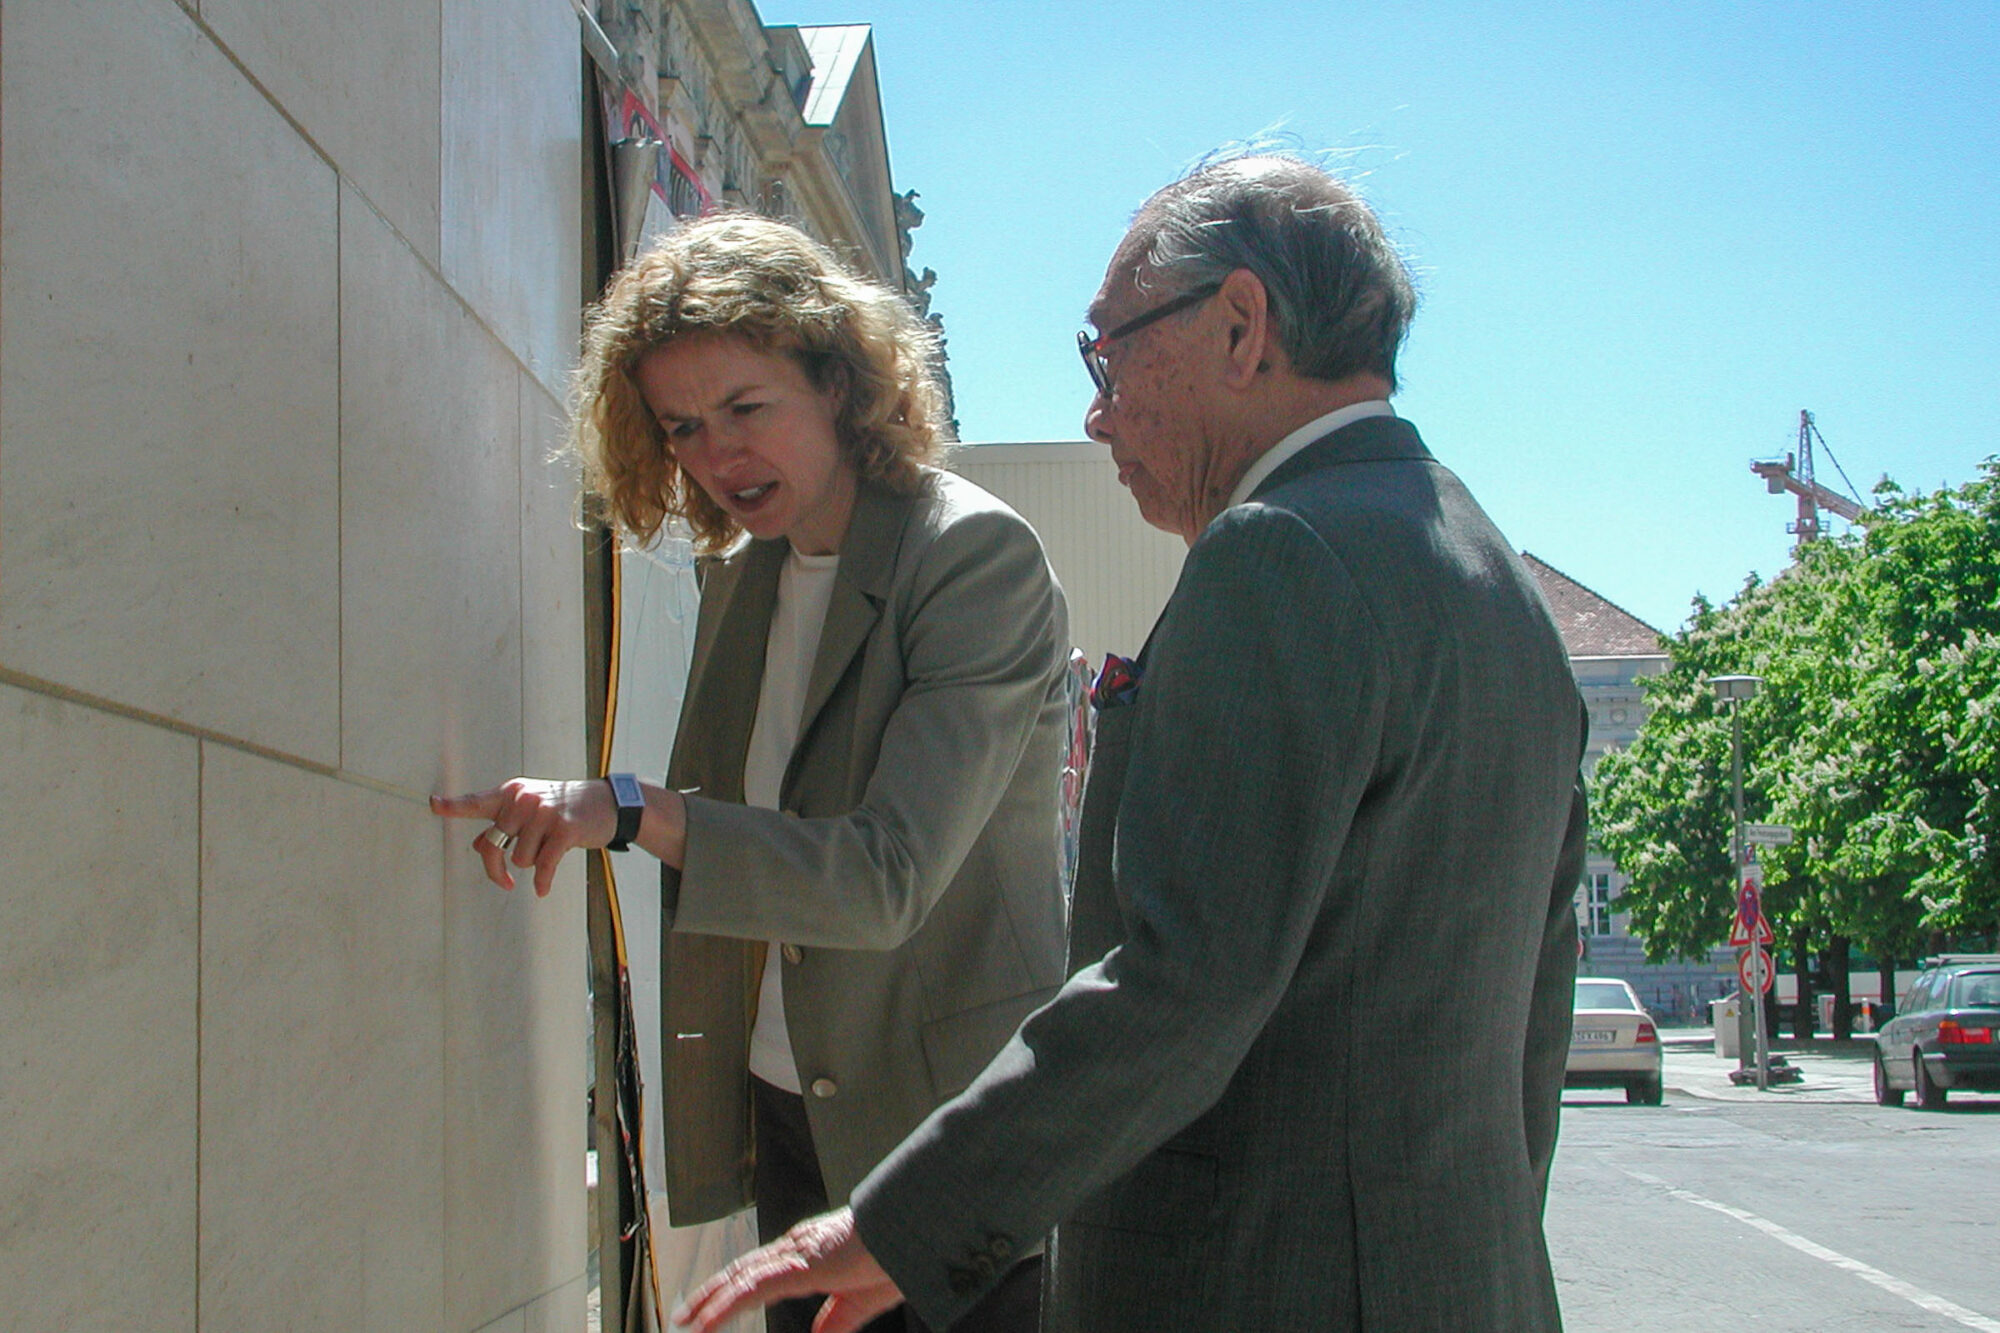 Christiane Flasche and I. M. Pei at the German Historical Museum, Berlin